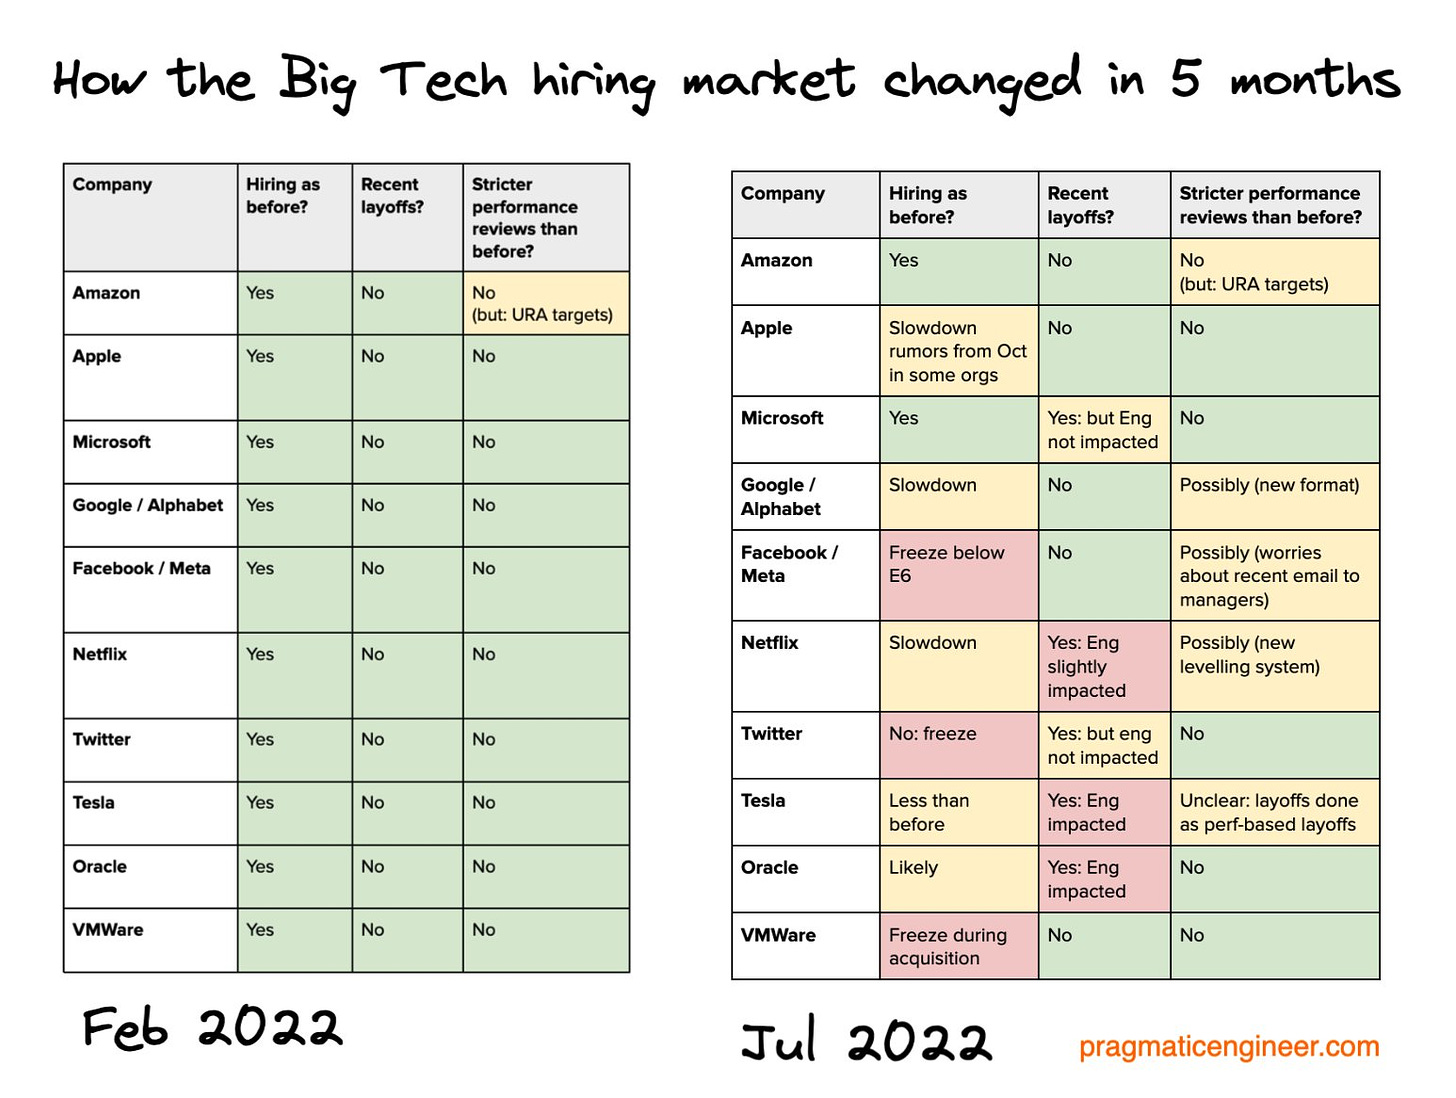 How the Big Tech hiring market has changed in just 5 months.